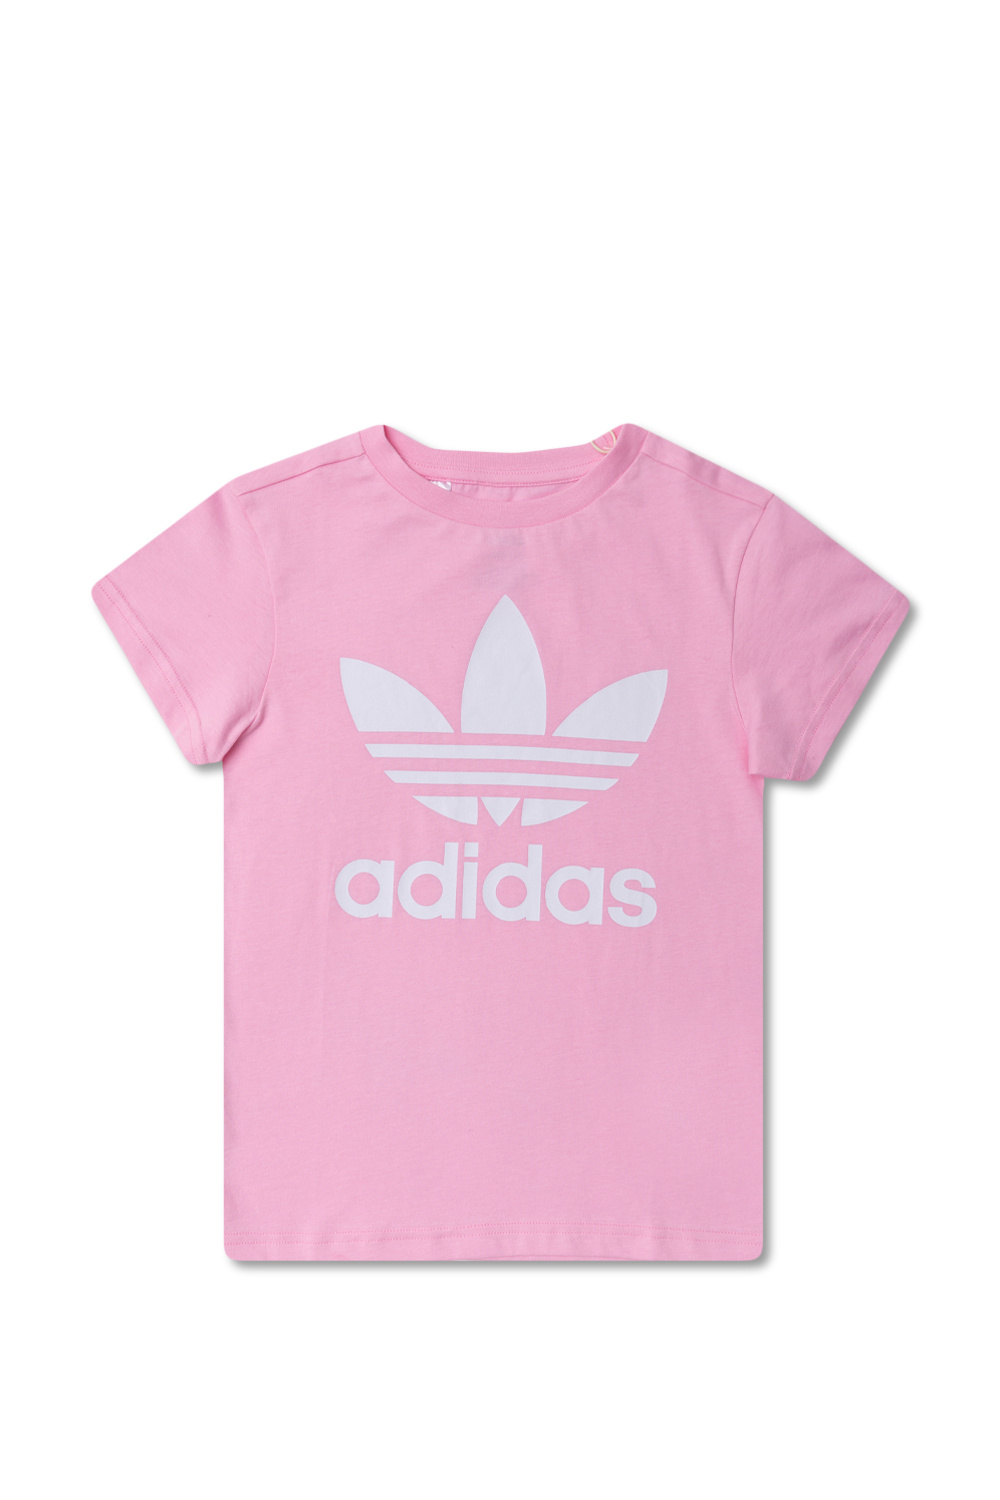 IetpShops Canada status server T in location logo - today - Pink cheap adidas Kids shirt ADIDAS - with order list cheap